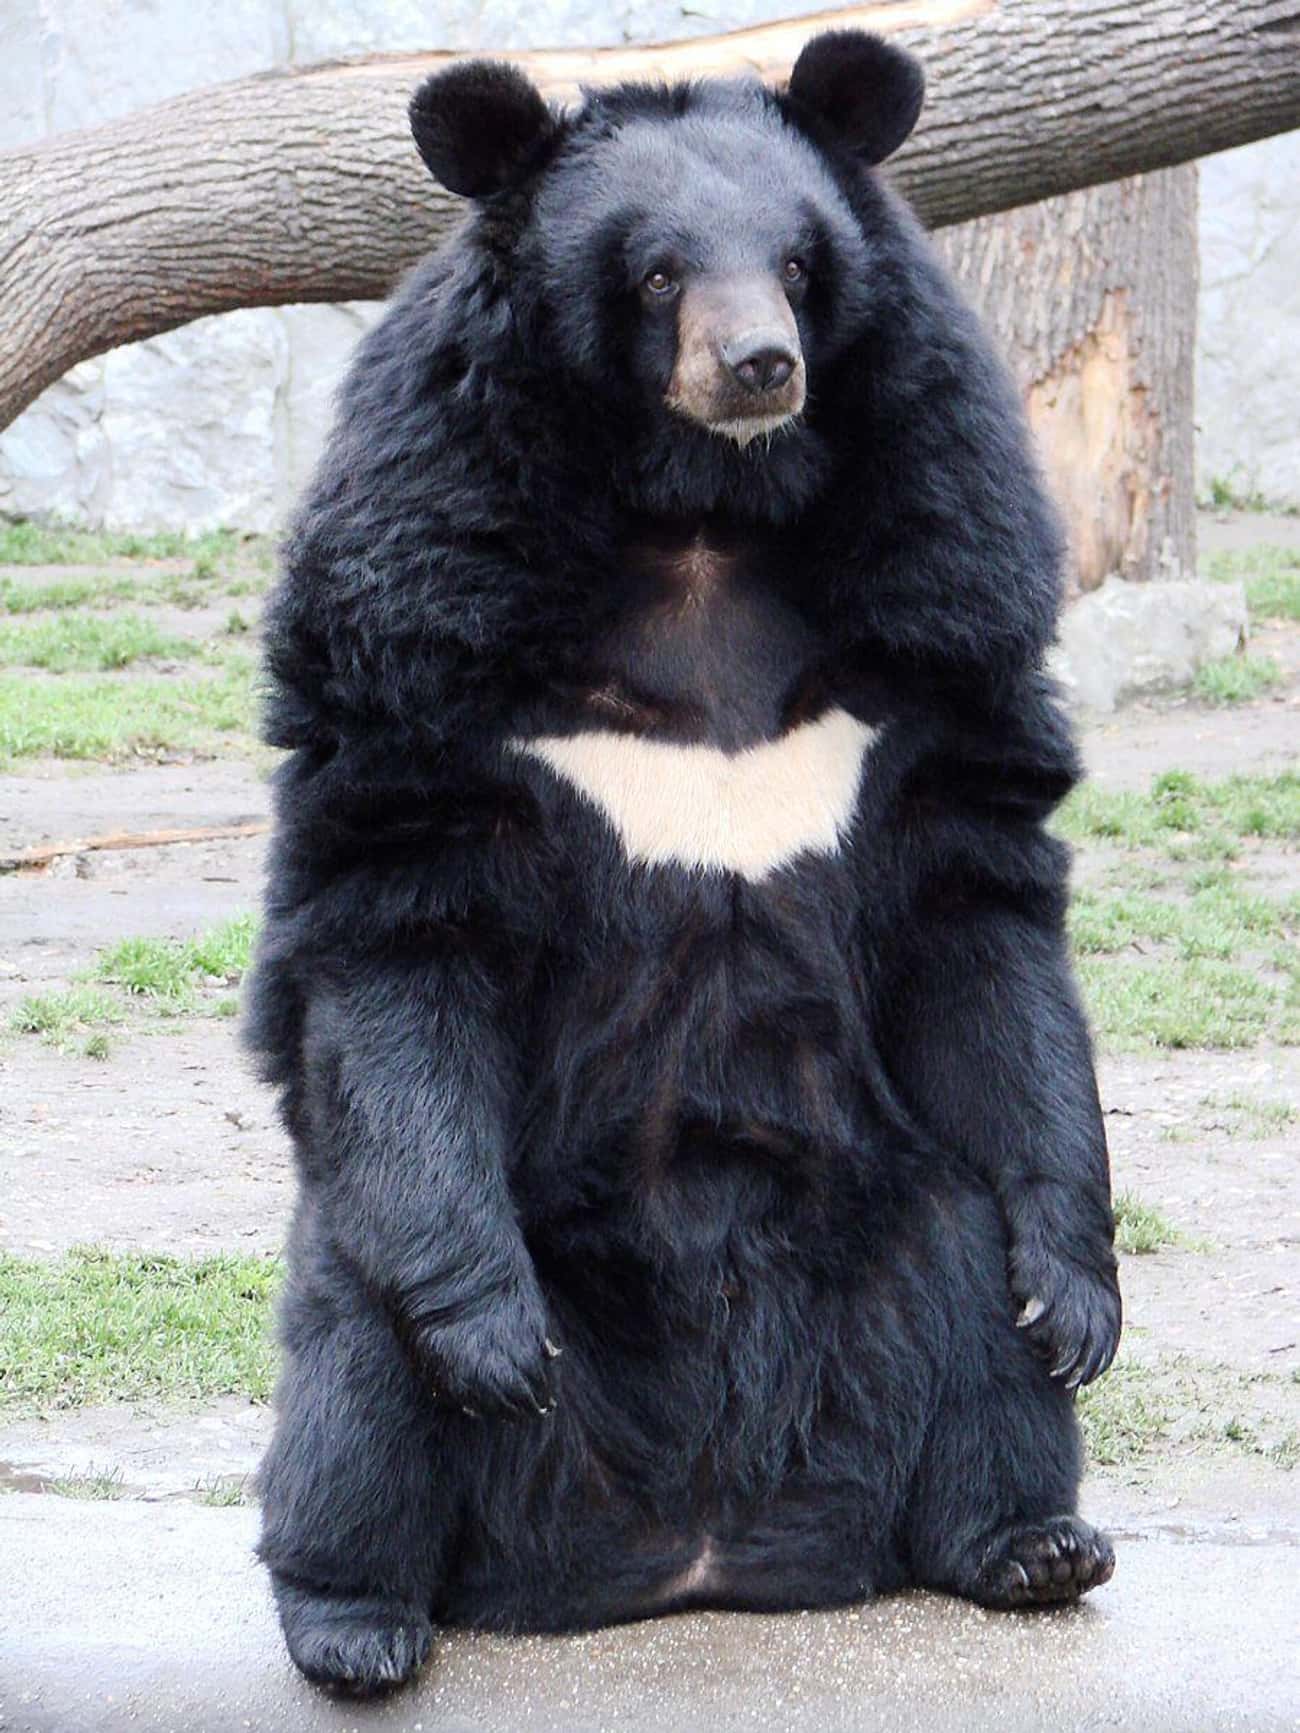 A Captive Bear Killed Her Son And Herself